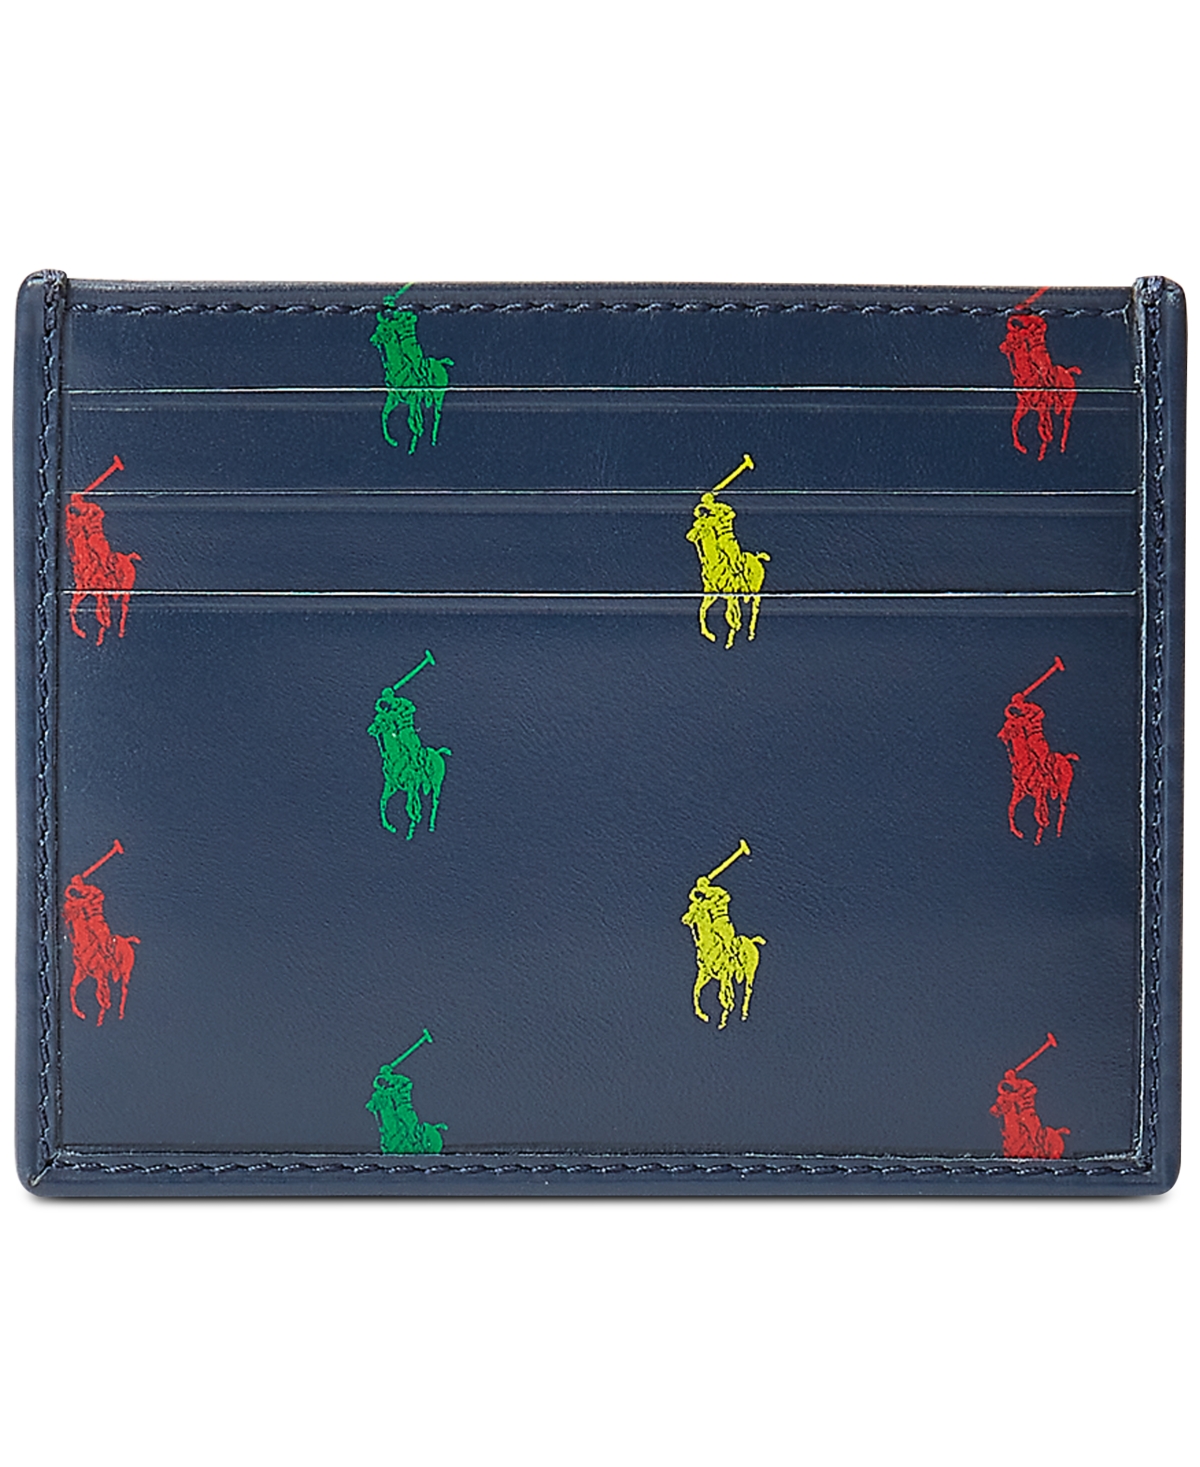 Polo Ralph Lauren Men's Signature Pony Leather Card Case In Navy,multi